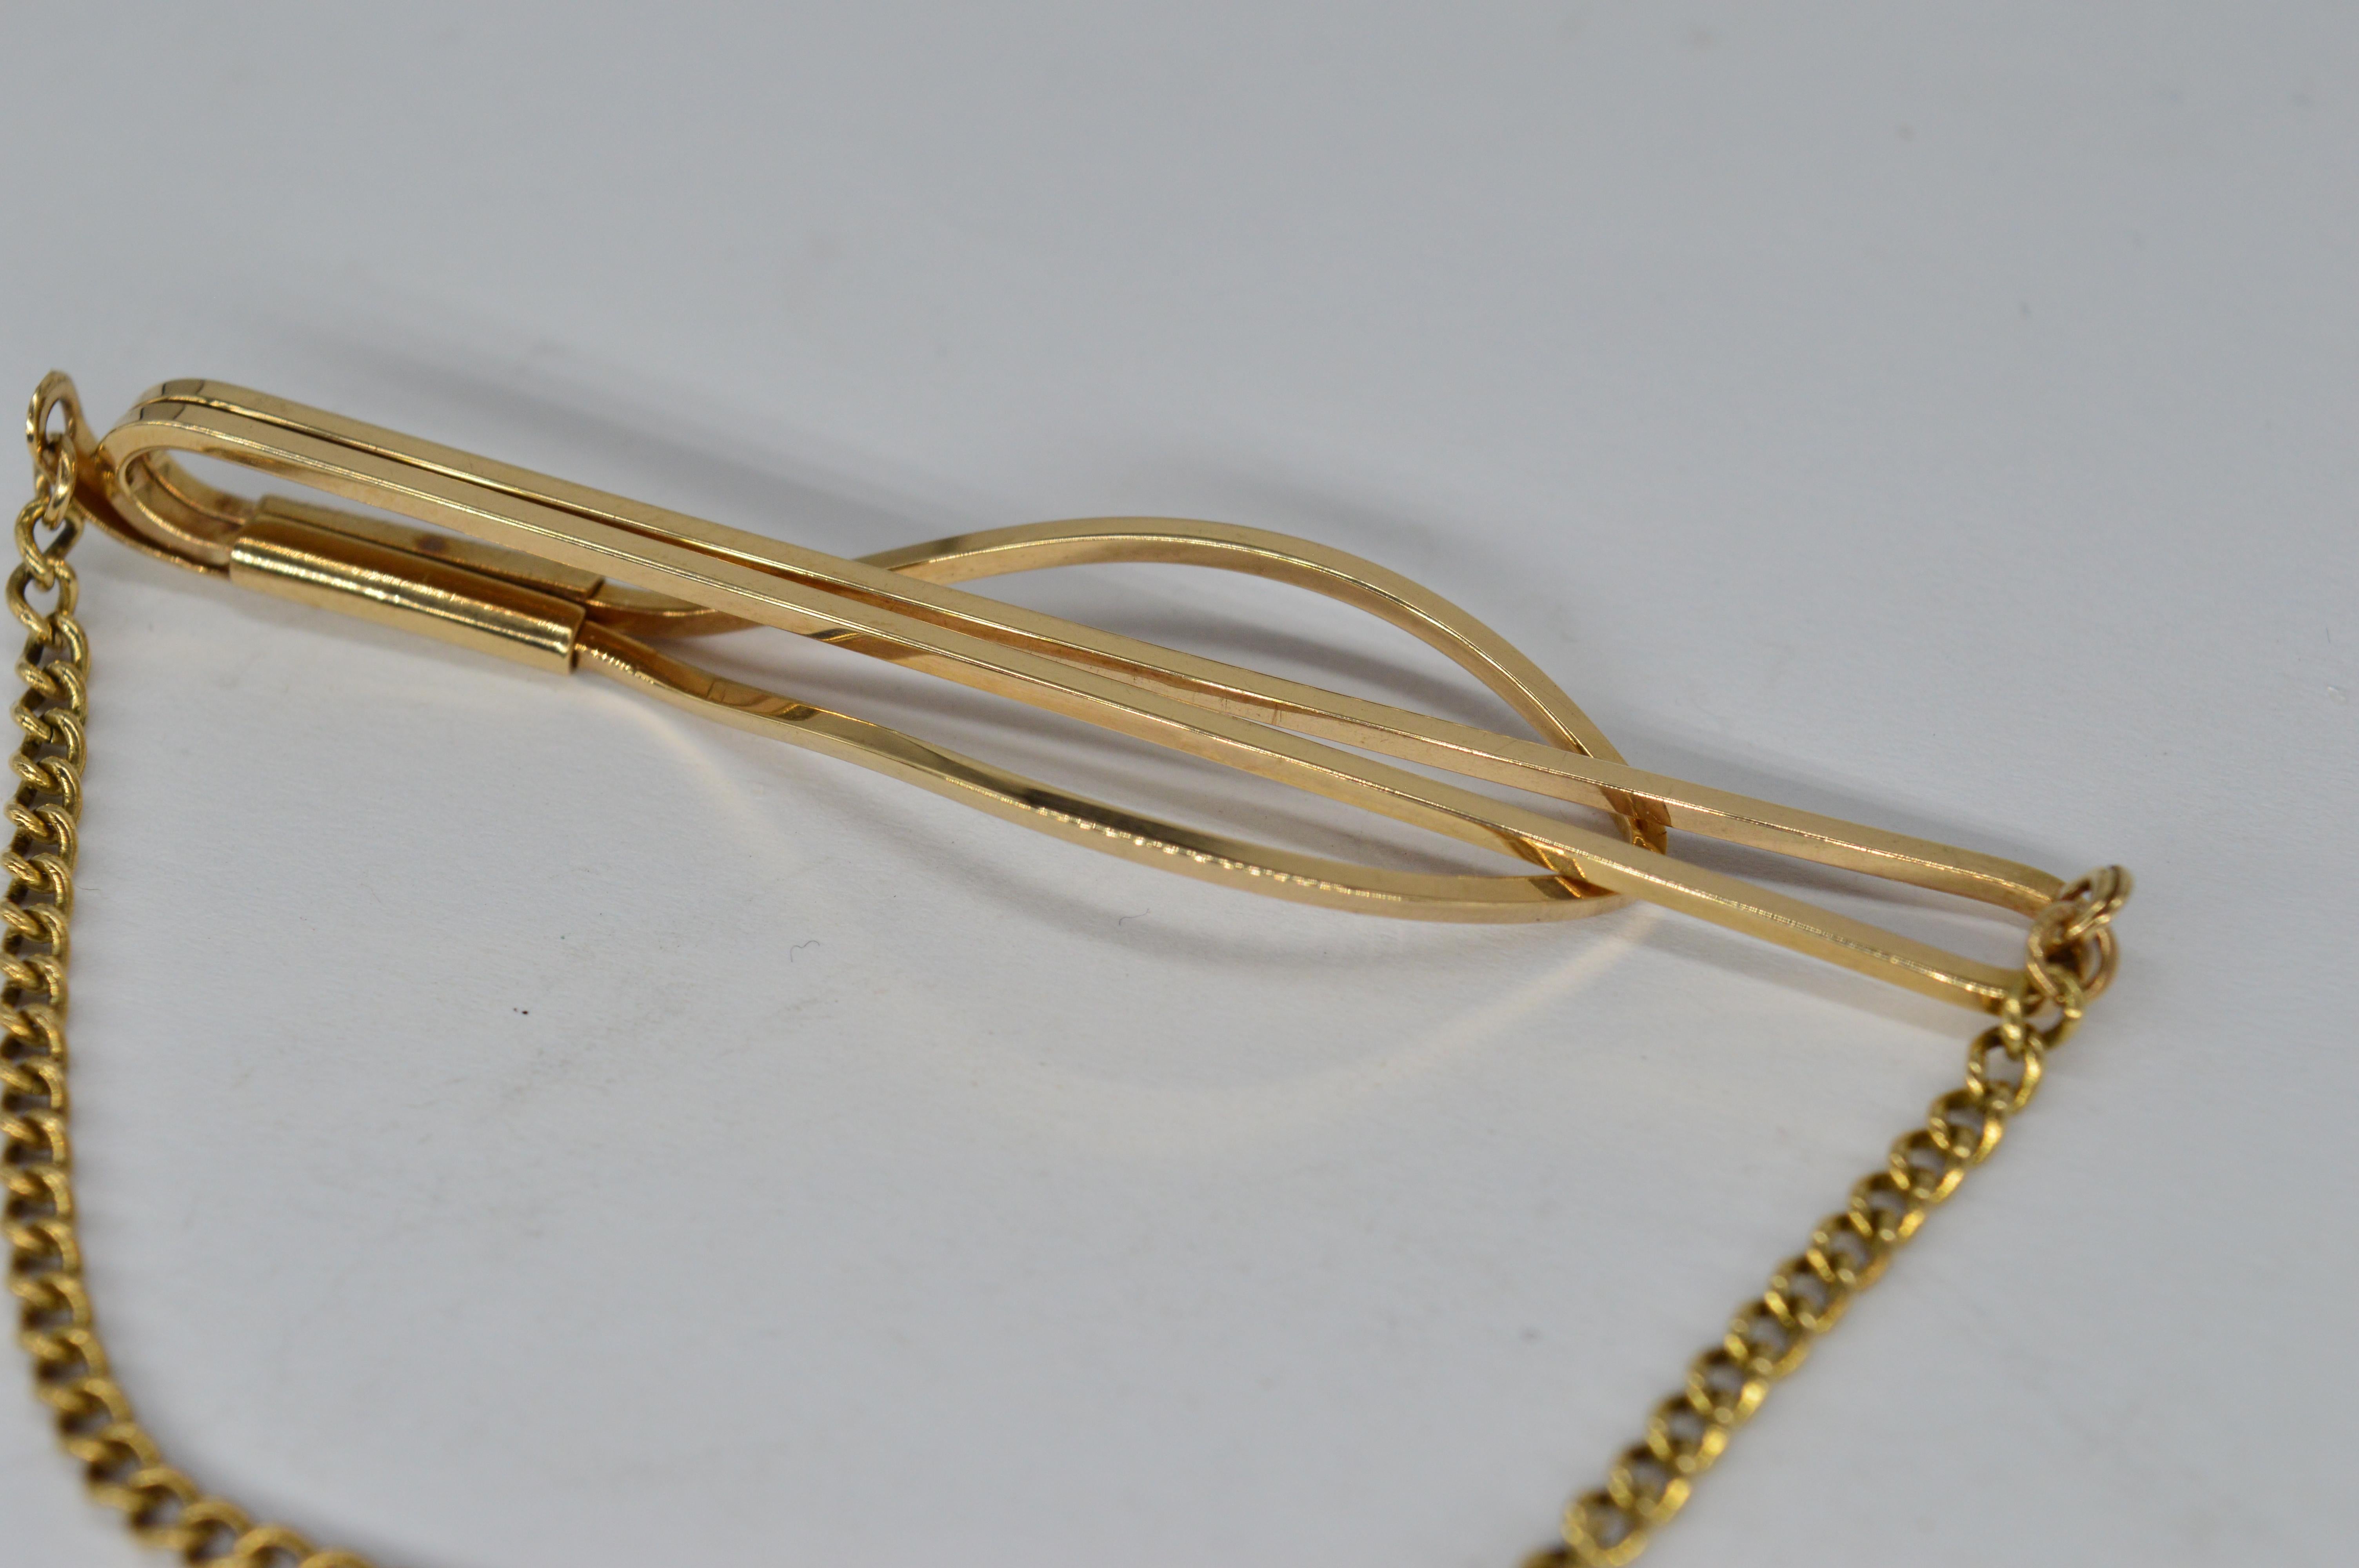 gold tie clip with chain